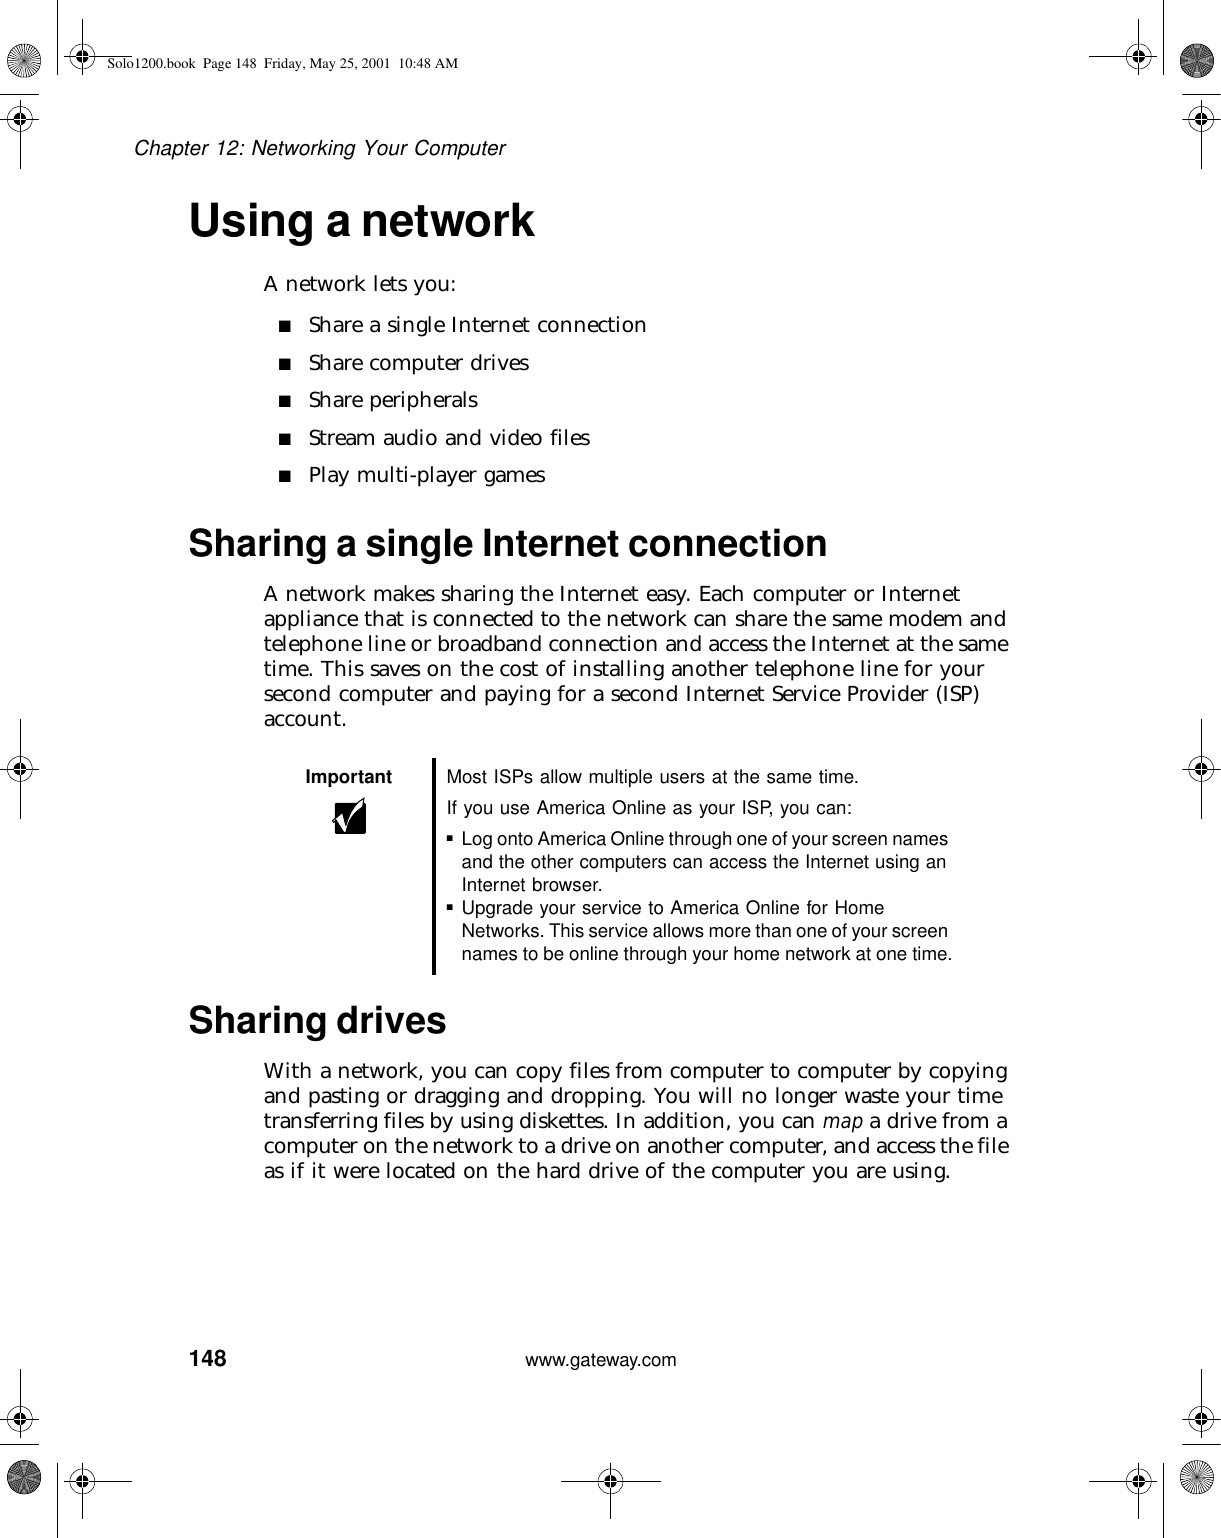 148Chapter 12: Networking Your Computerwww.gateway.comUsing a networkA network lets you:■Share a single Internet connection■Share computer drives■Share peripherals■Stream audio and video files■Play multi-player gamesSharing a single Internet connectionA network makes sharing the Internet easy. Each computer or Internet appliance that is connected to the network can share the same modem and telephone line or broadband connection and access the Internet at the same time. This saves on the cost of installing another telephone line for your second computer and paying for a second Internet Service Provider (ISP) account.Sharing drivesWith a network, you can copy files from computer to computer by copying and pasting or dragging and dropping. You will no longer waste your time transferring files by using diskettes. In addition, you can map a drive from a computer on the network to a drive on another computer, and access the file as if it were located on the hard drive of the computer you are using.Important Most ISPs allow multiple users at the same time.If you use America Online as your ISP, you can:■Log onto America Online through one of your screen names and the other computers can access the Internet using an Internet browser.■Upgrade your service to America Online for Home Networks. This service allows more than one of your screen names to be online through your home network at one time.Solo1200.book Page 148 Friday, May 25, 2001 10:48 AM